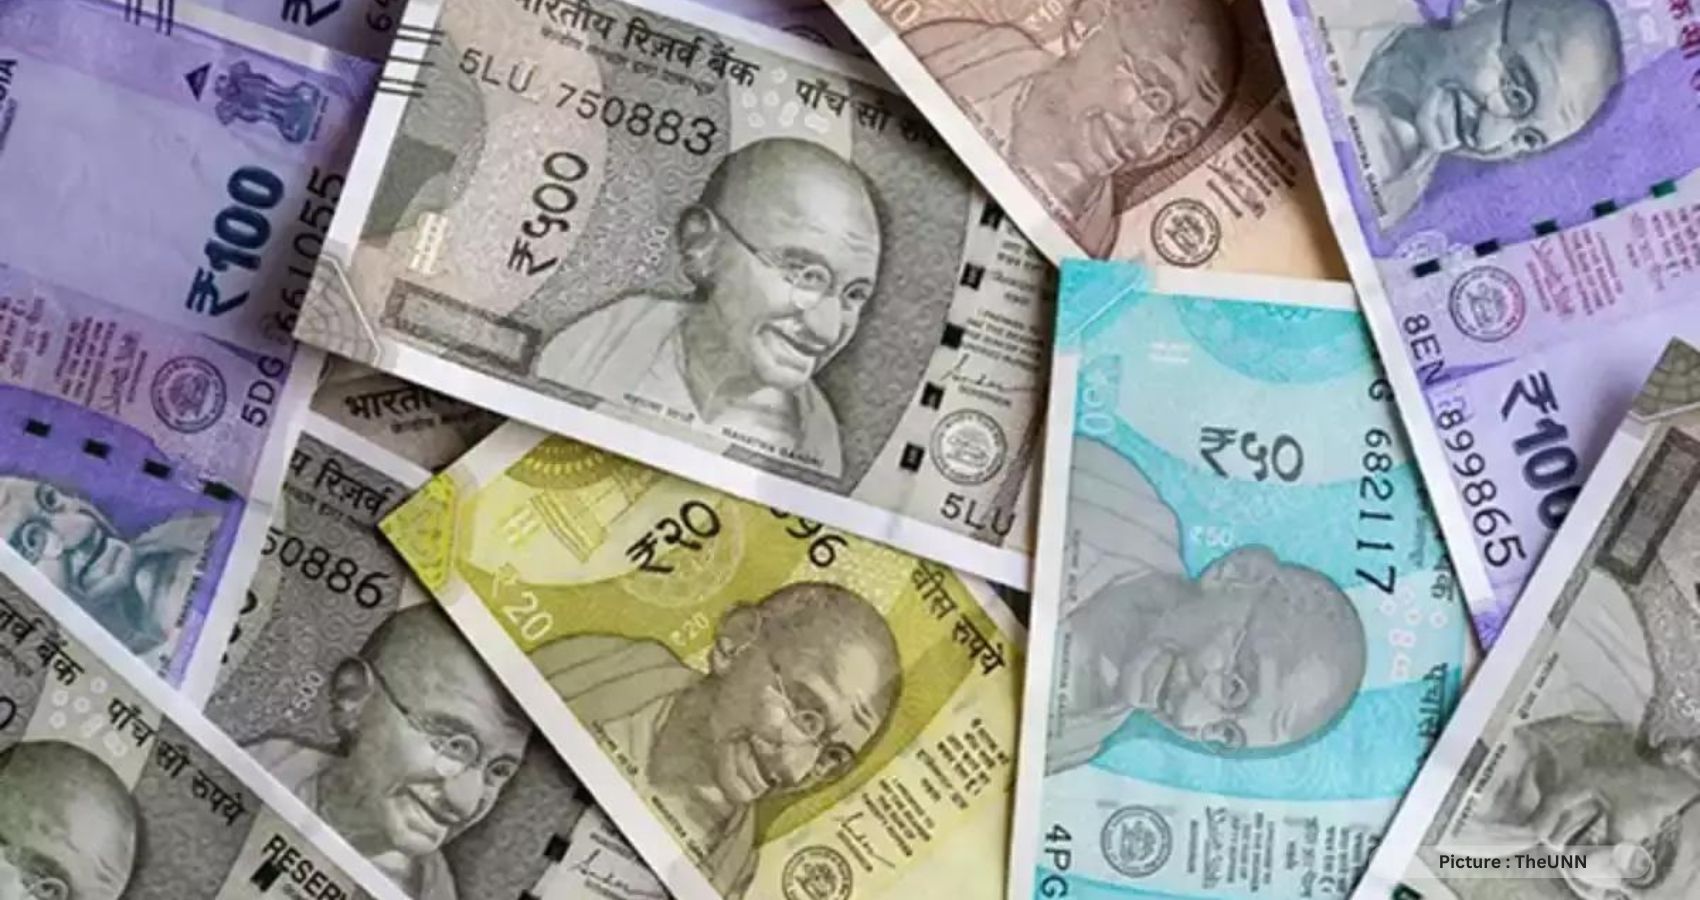 How Did Mahatma Gandhi’s Portrait Come On Indian Banknotes